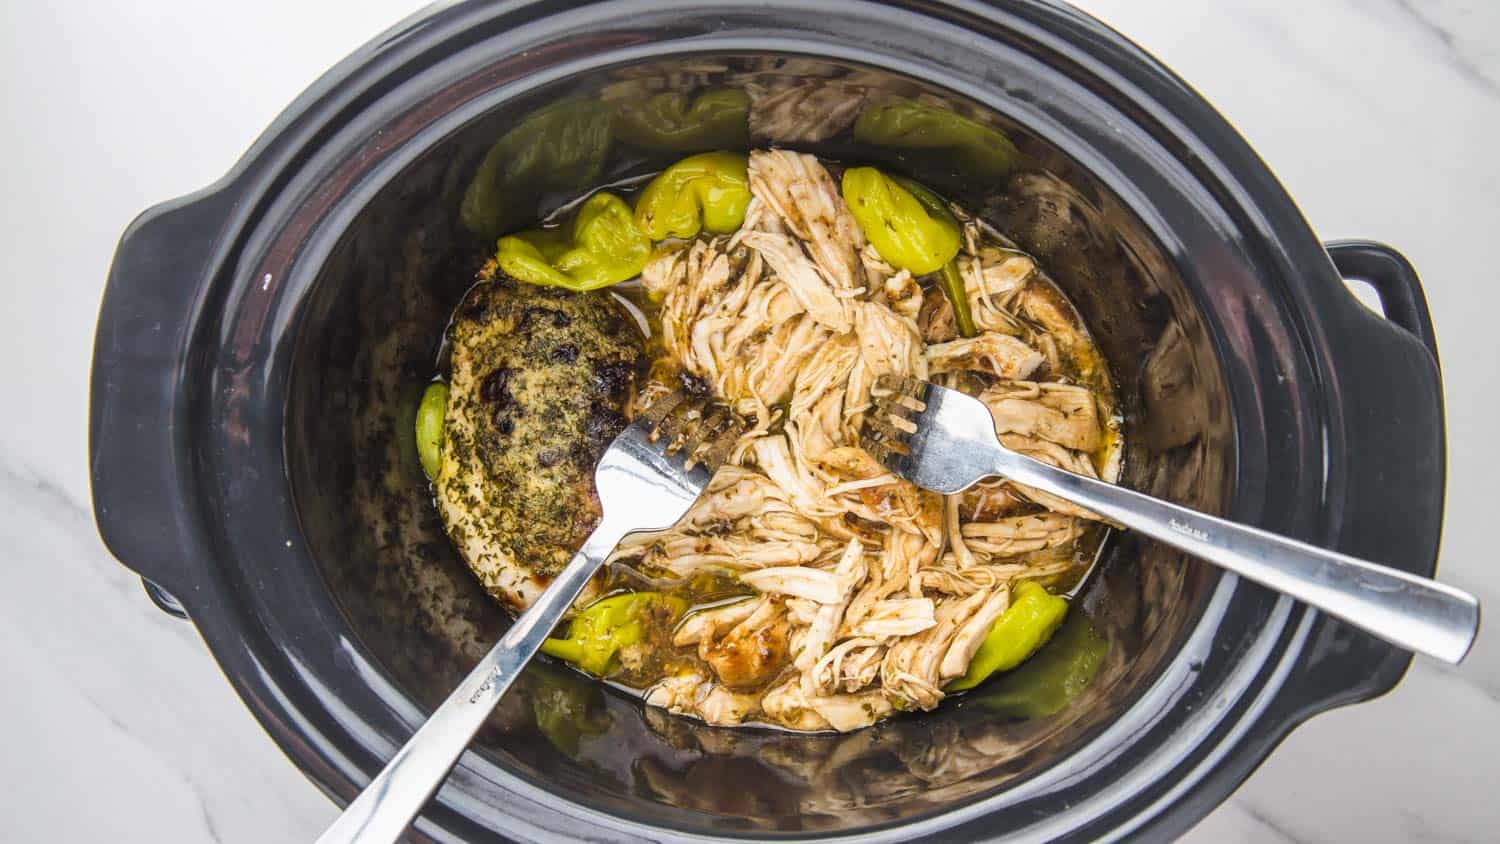 two forks being used to shred mississippi chicken in a crock pot insert